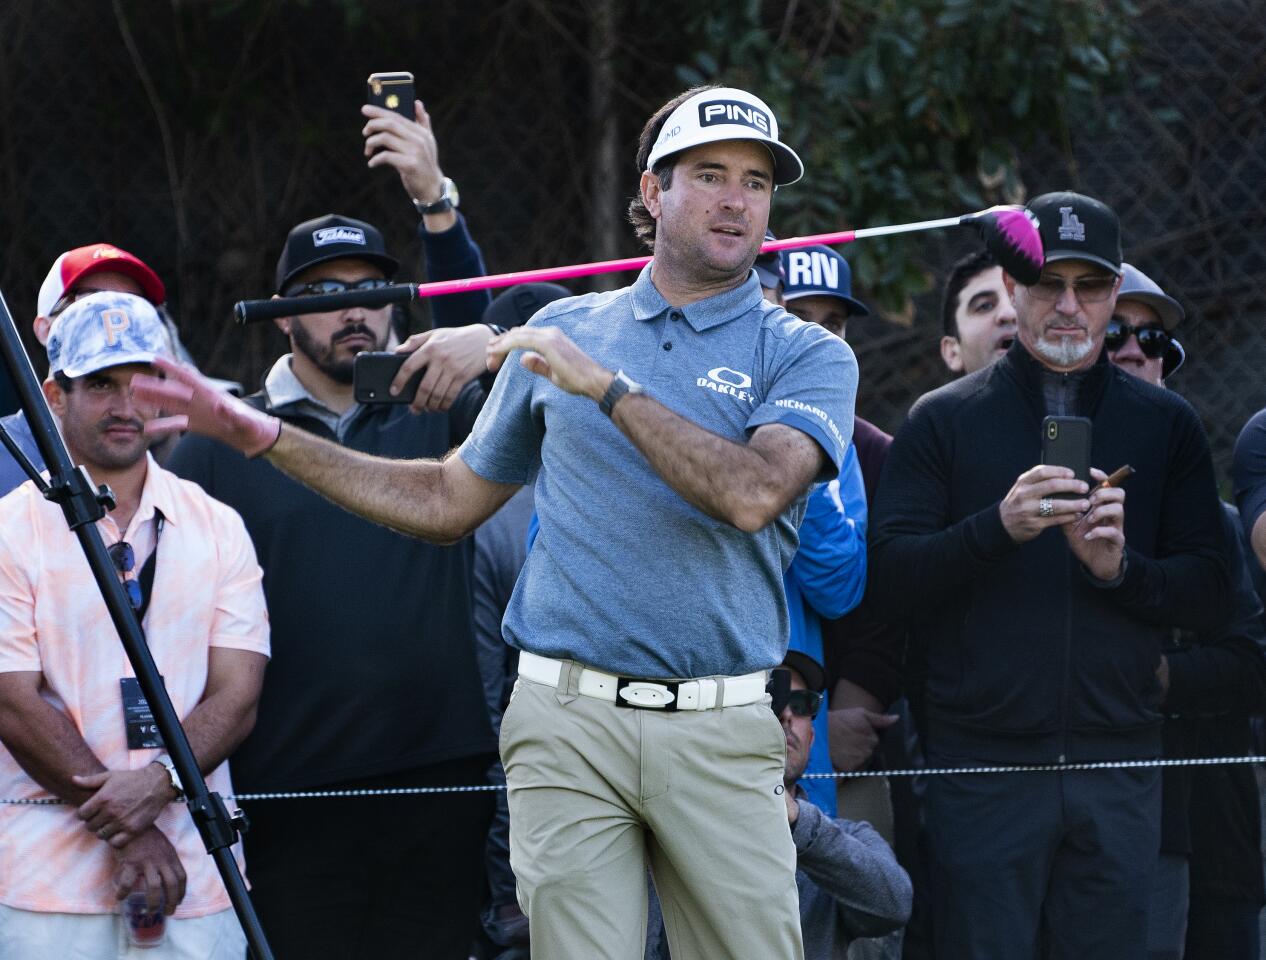 Bubba Watson lets go of his club after missing the fairway on the 11th hole during the second round of the Genesis Invitational at Riviera Country Club on Feb. 14, 2020.